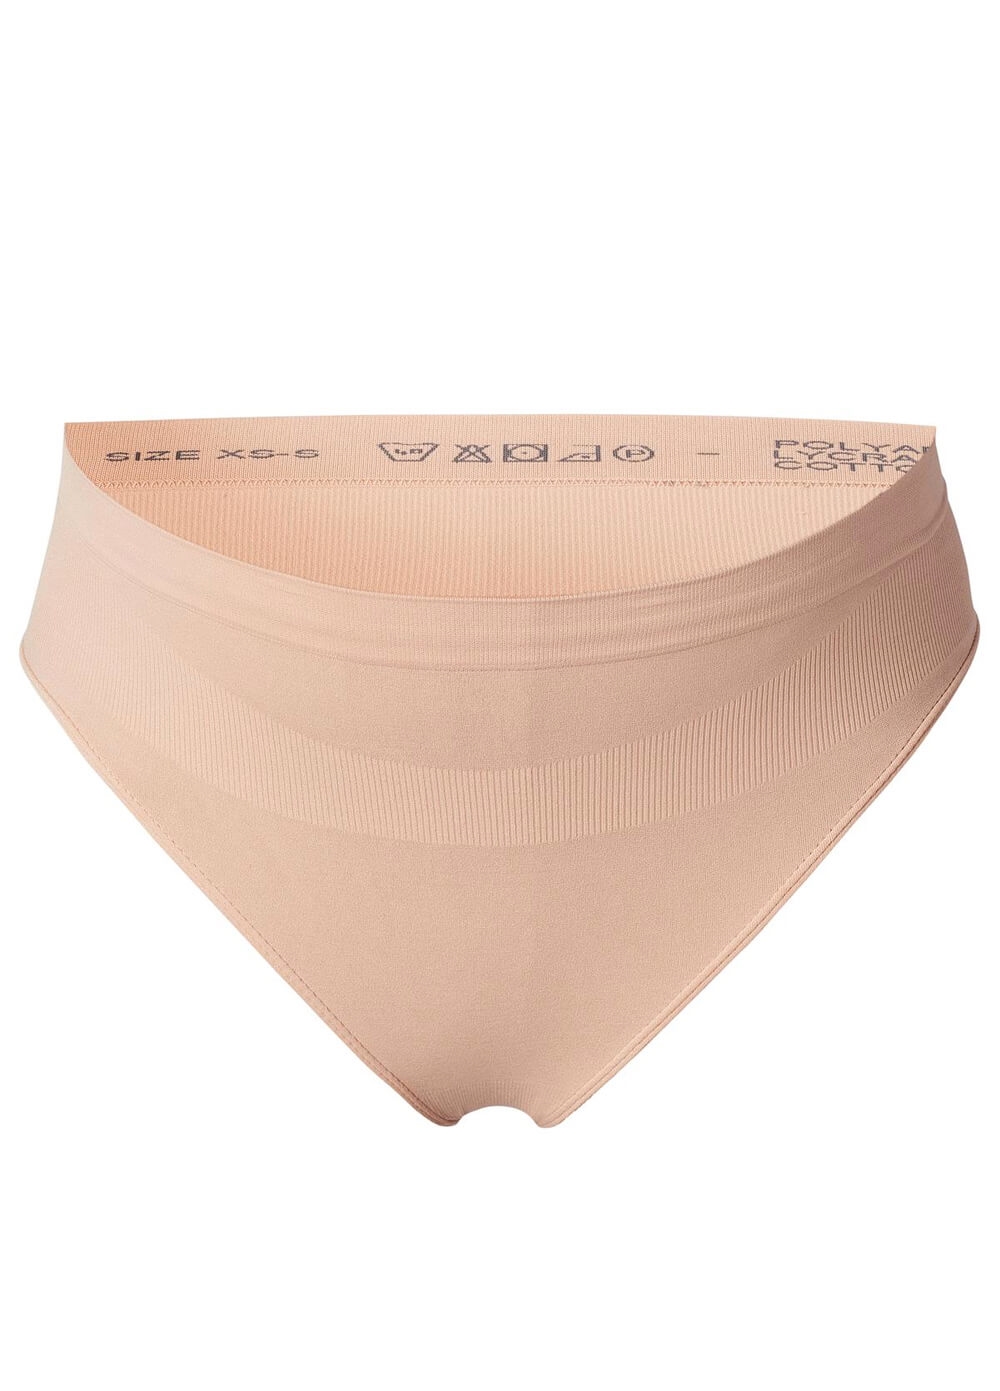 Noppies - Seamless Maternity G-String Brief in Nude | Queen Bee